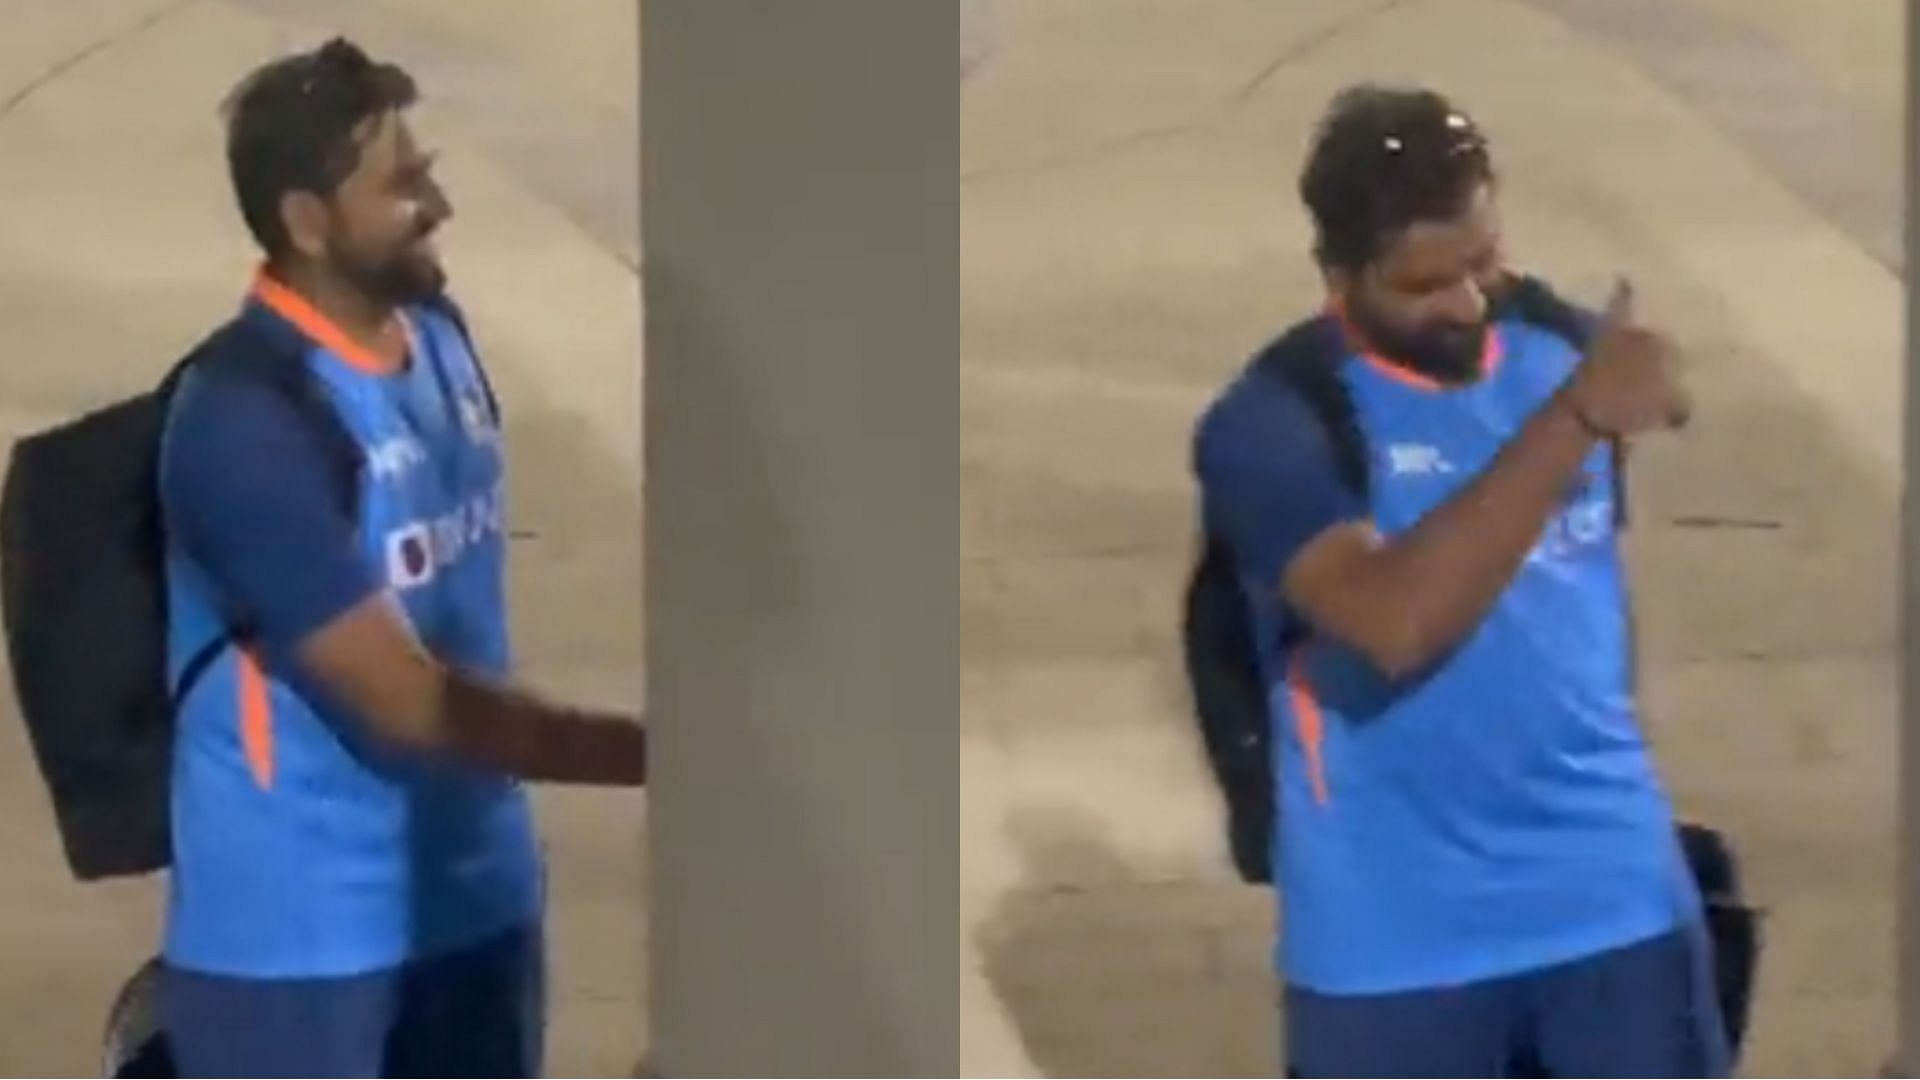 Rohit Sharma interacted with fans after the Asia Cup 2022 match against Pakistan (Image: Twitter)